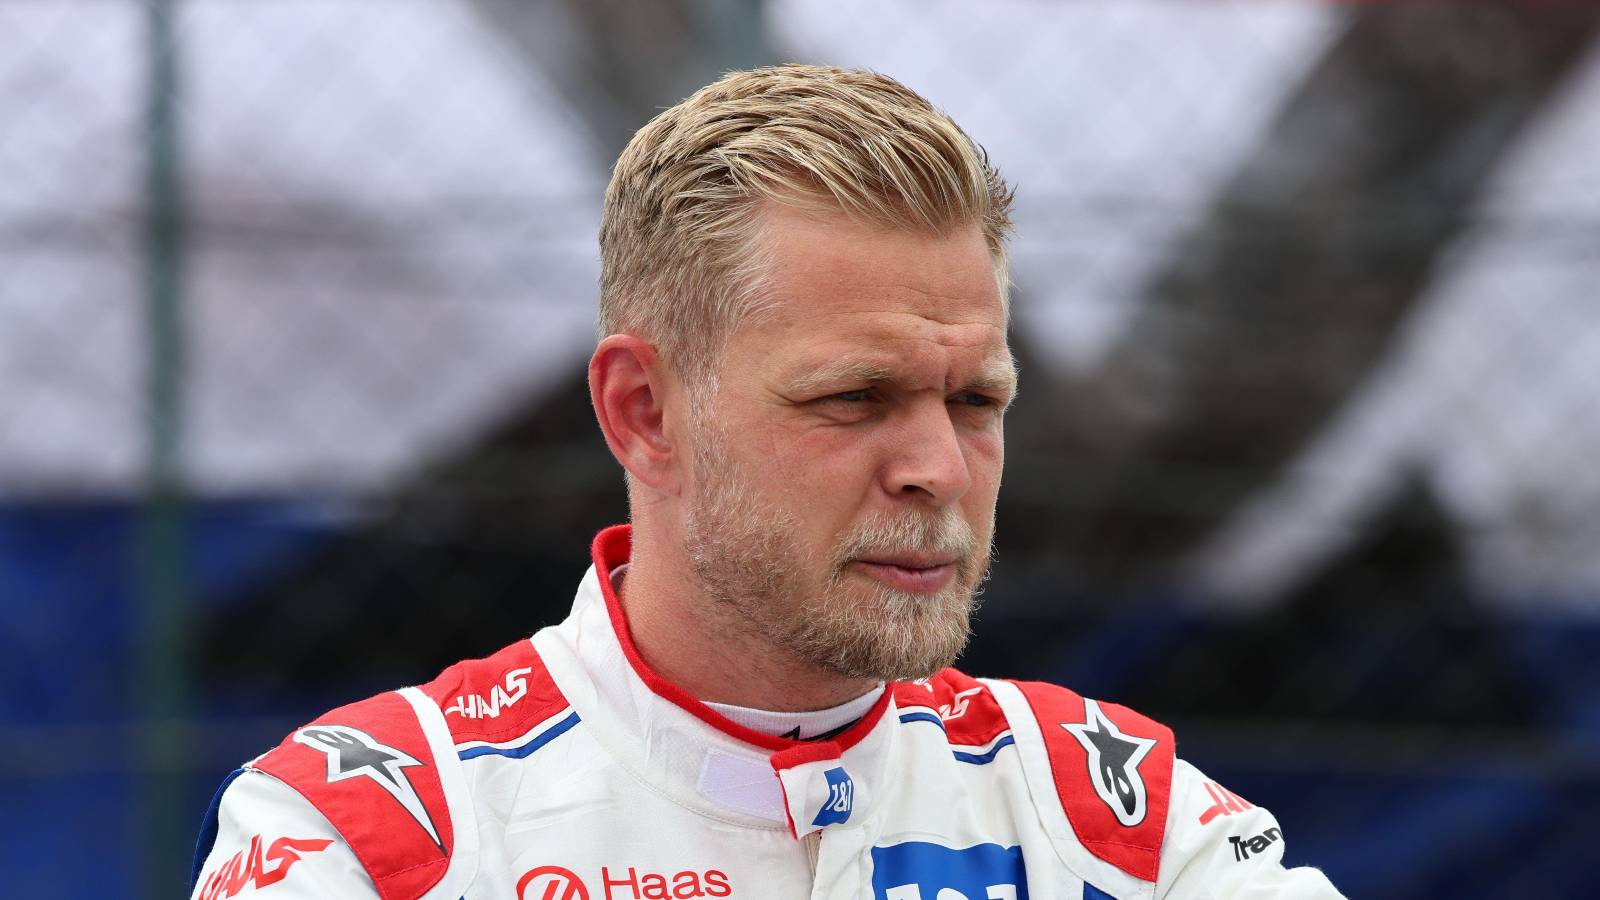 Magnussen's Chinese GP Penalty Challenged by Haas F1 Boss as Unjust